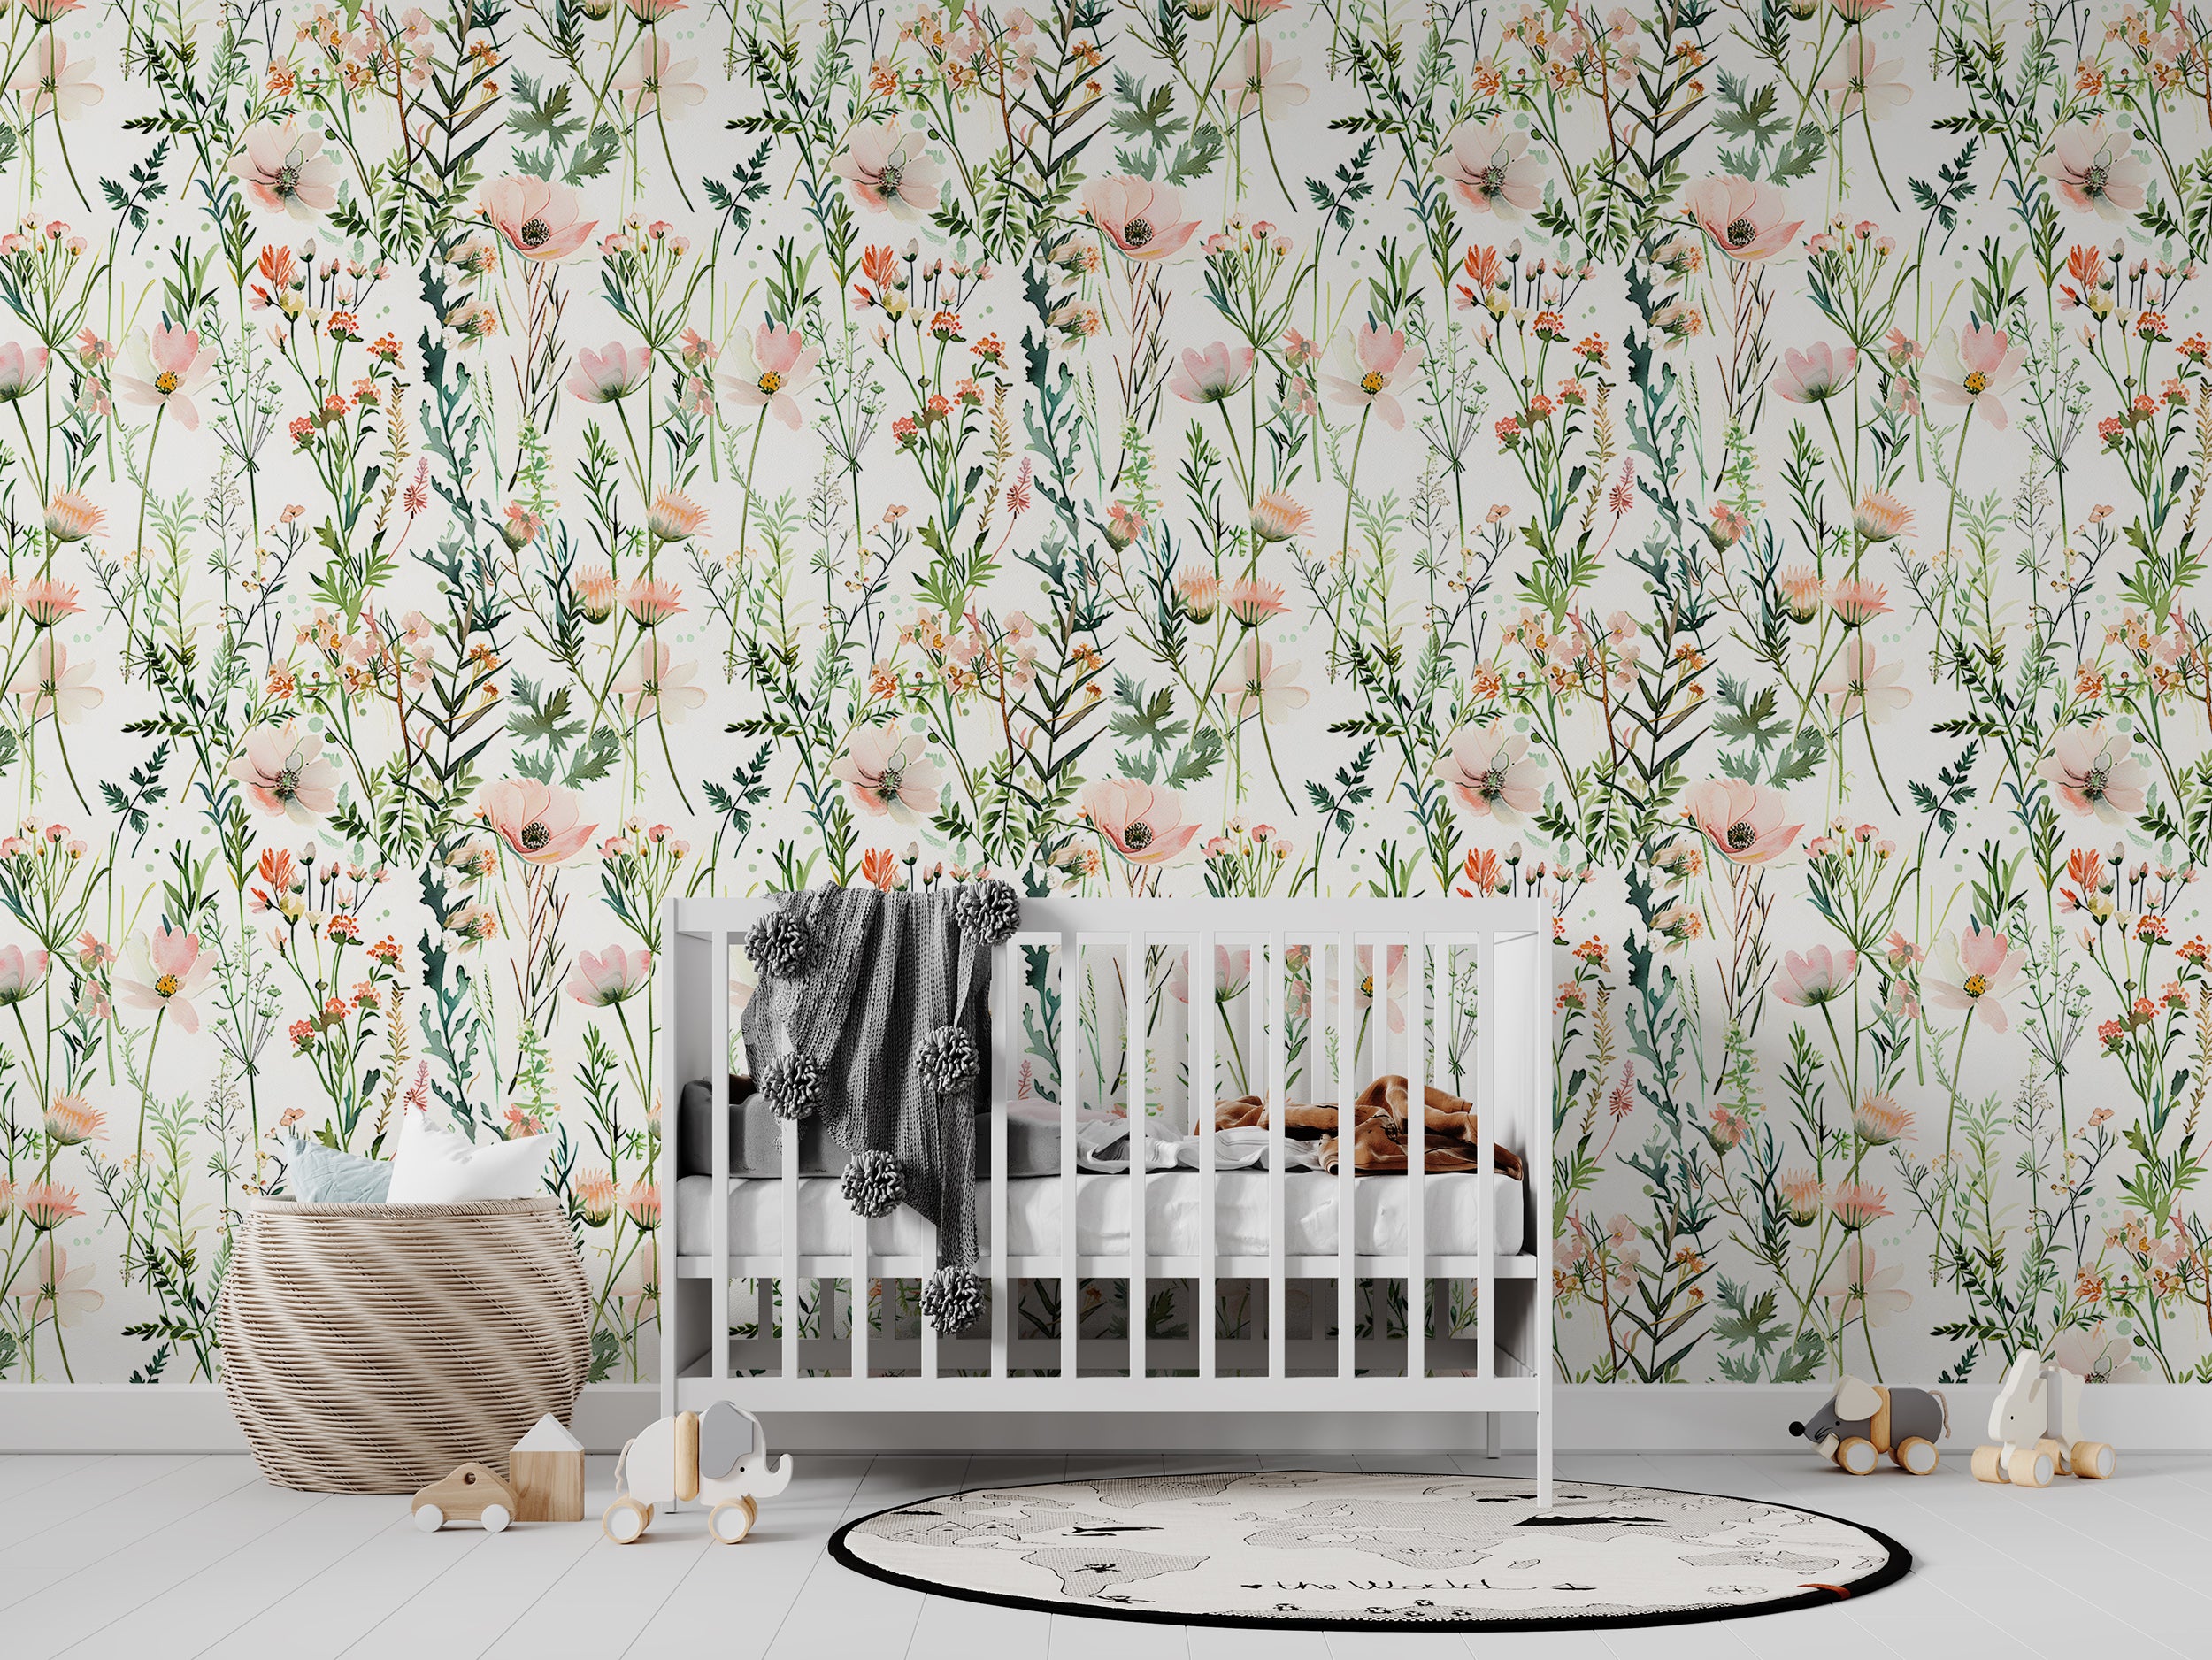 Wild Floral Wallpaper, Pastel Pink and Green Botanical Pattern Wallpaper, Watercolor Meadow Flowers Decal, Peel and Stick Minimalistic Light Floral Decor